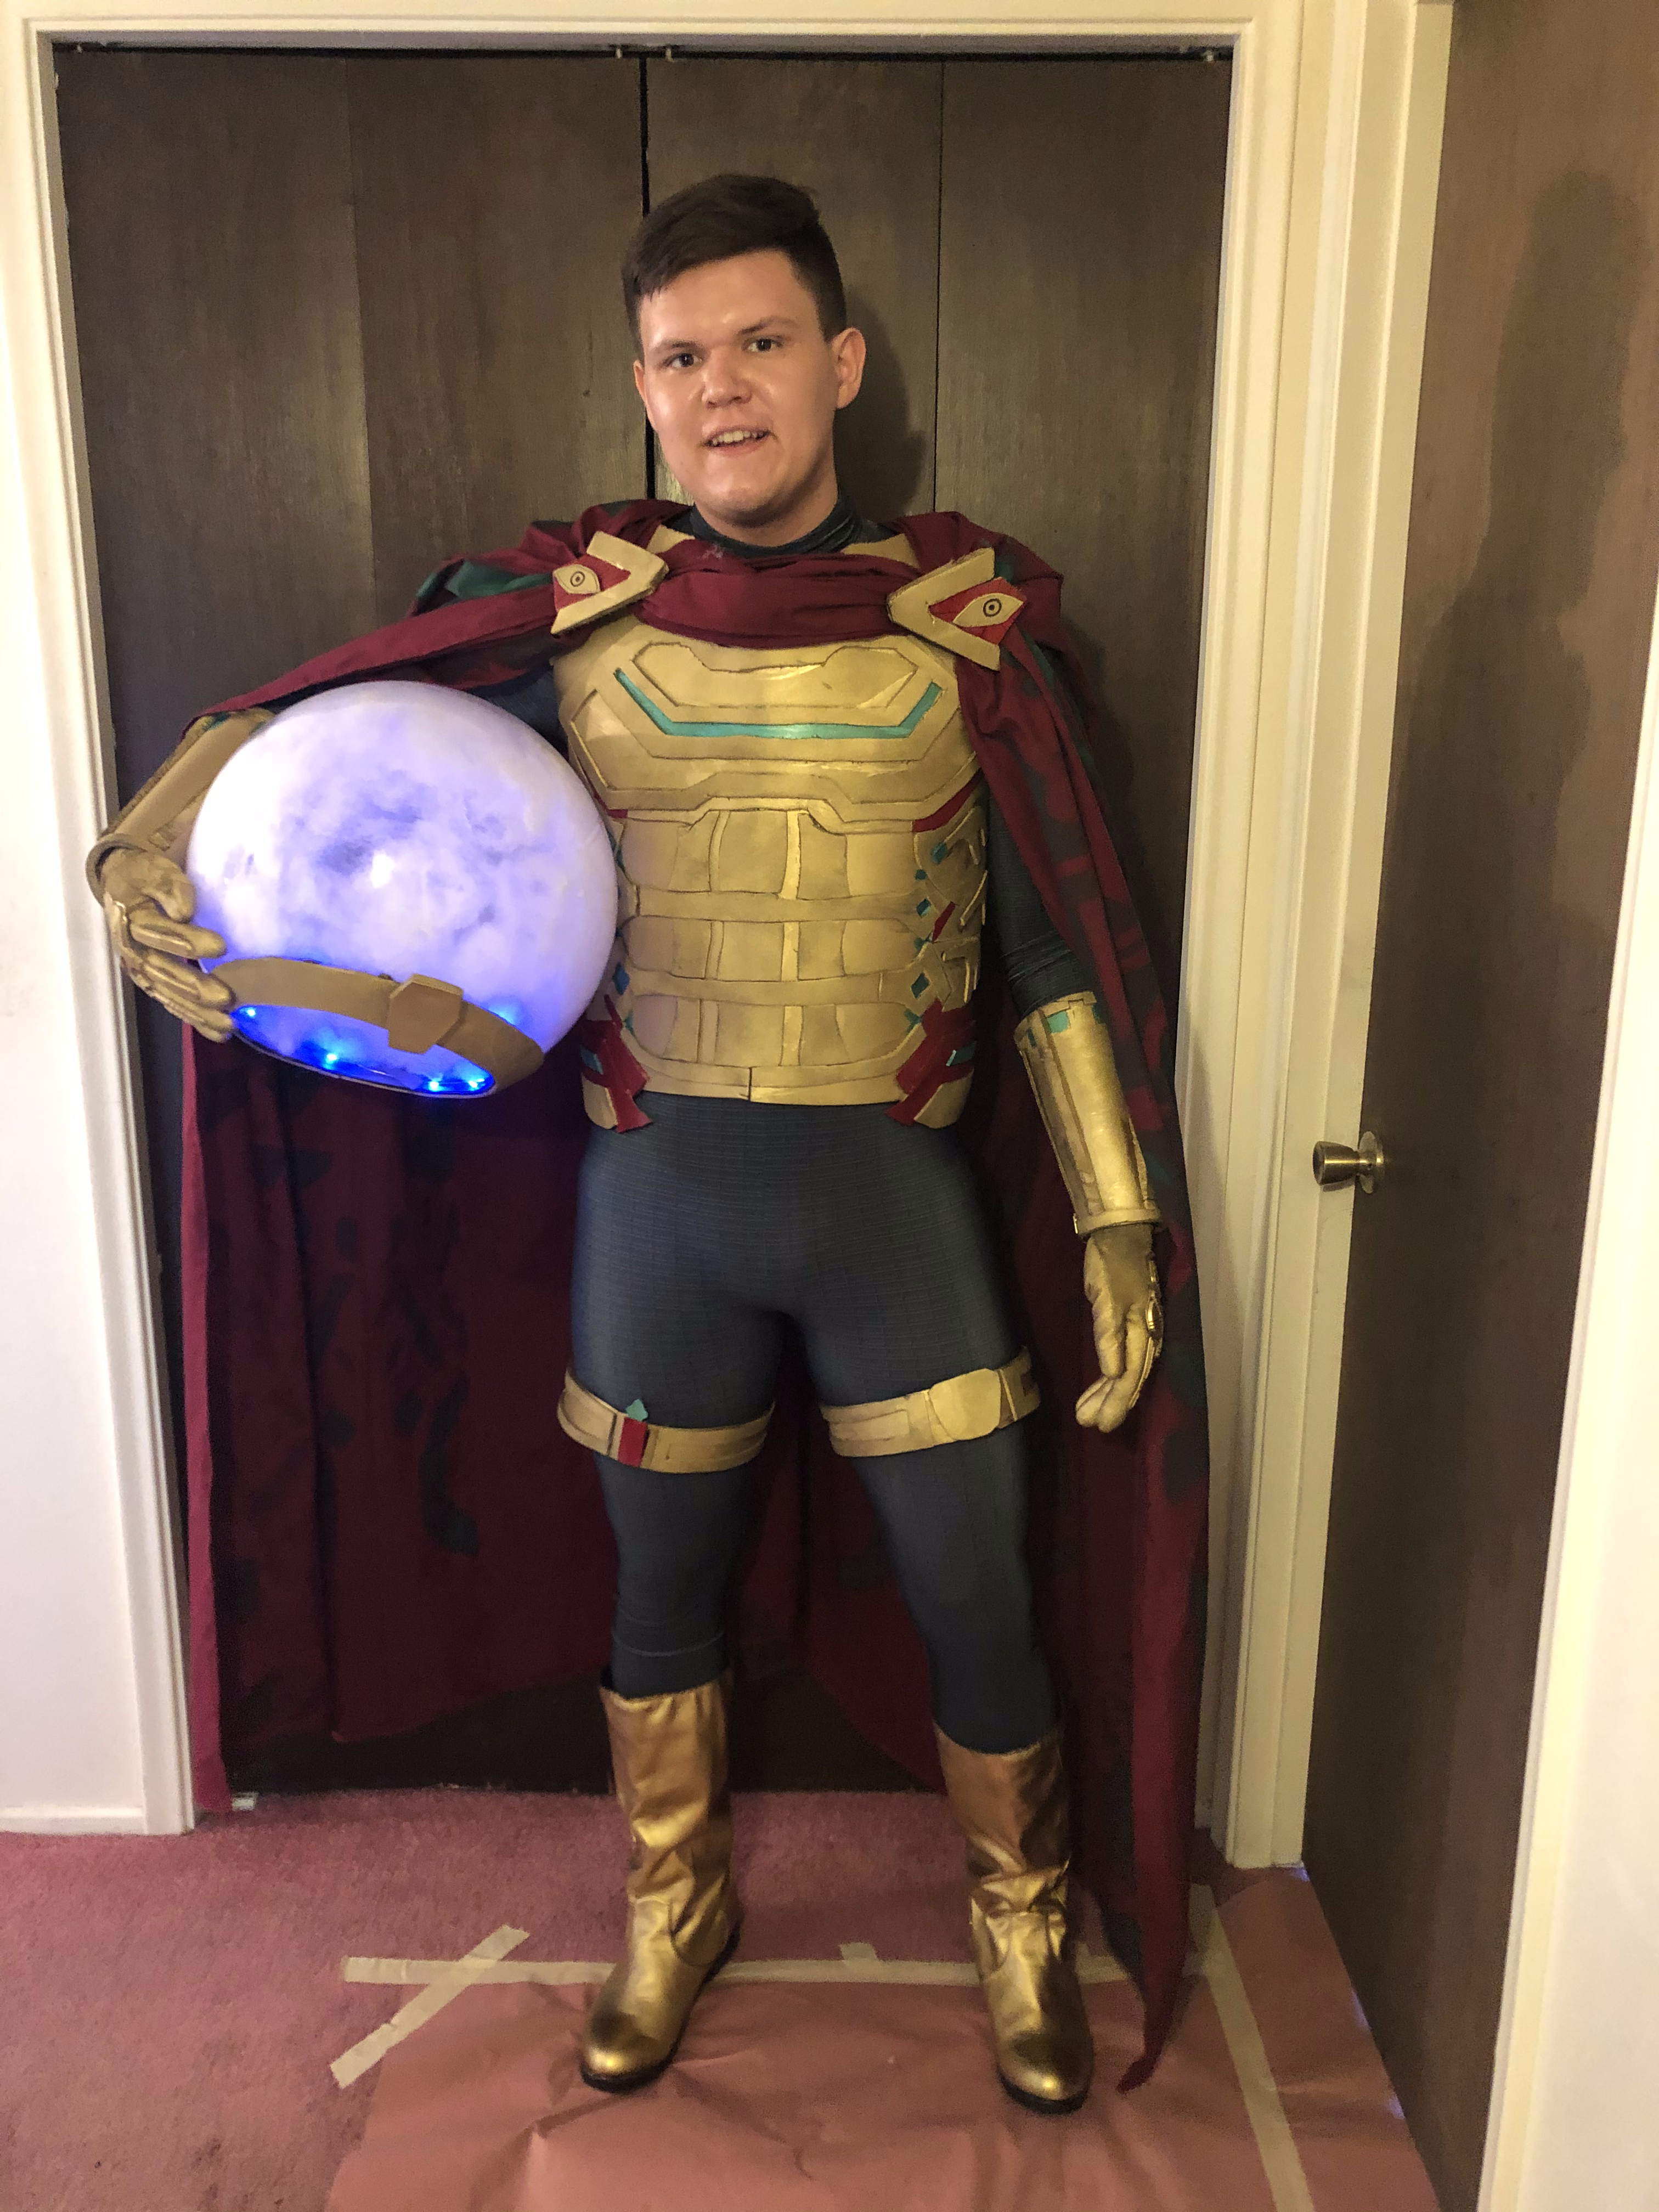 Stephen Dressed in the Mysterio Full Costume